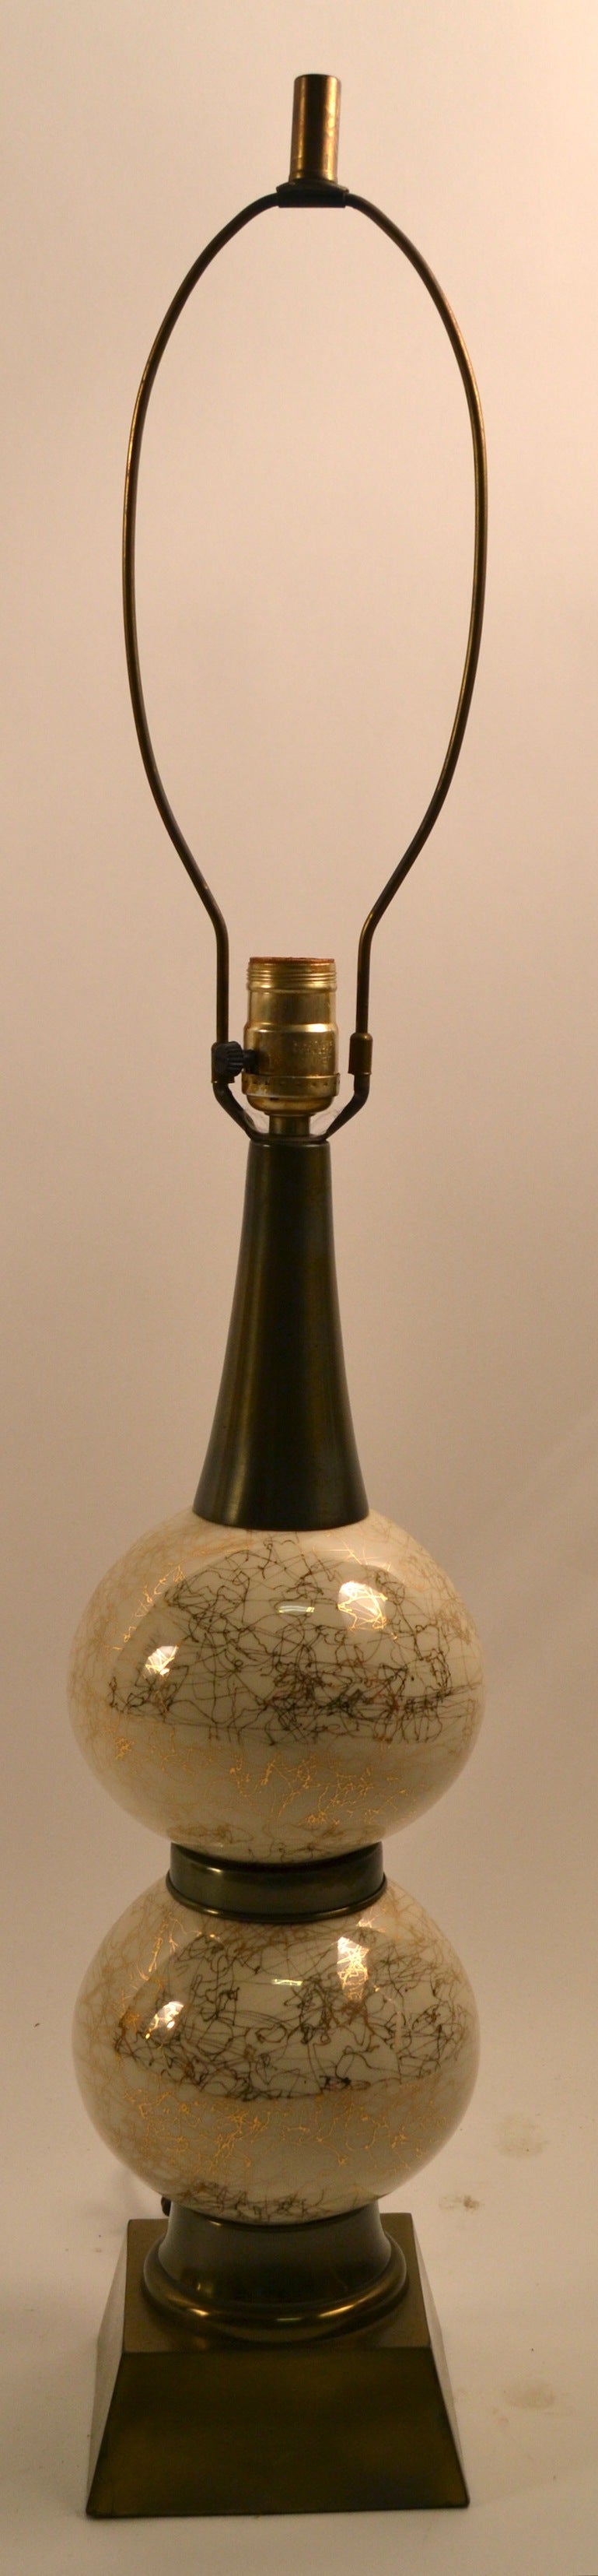 Brass base, supports stacked white ceramic balls, with gold 